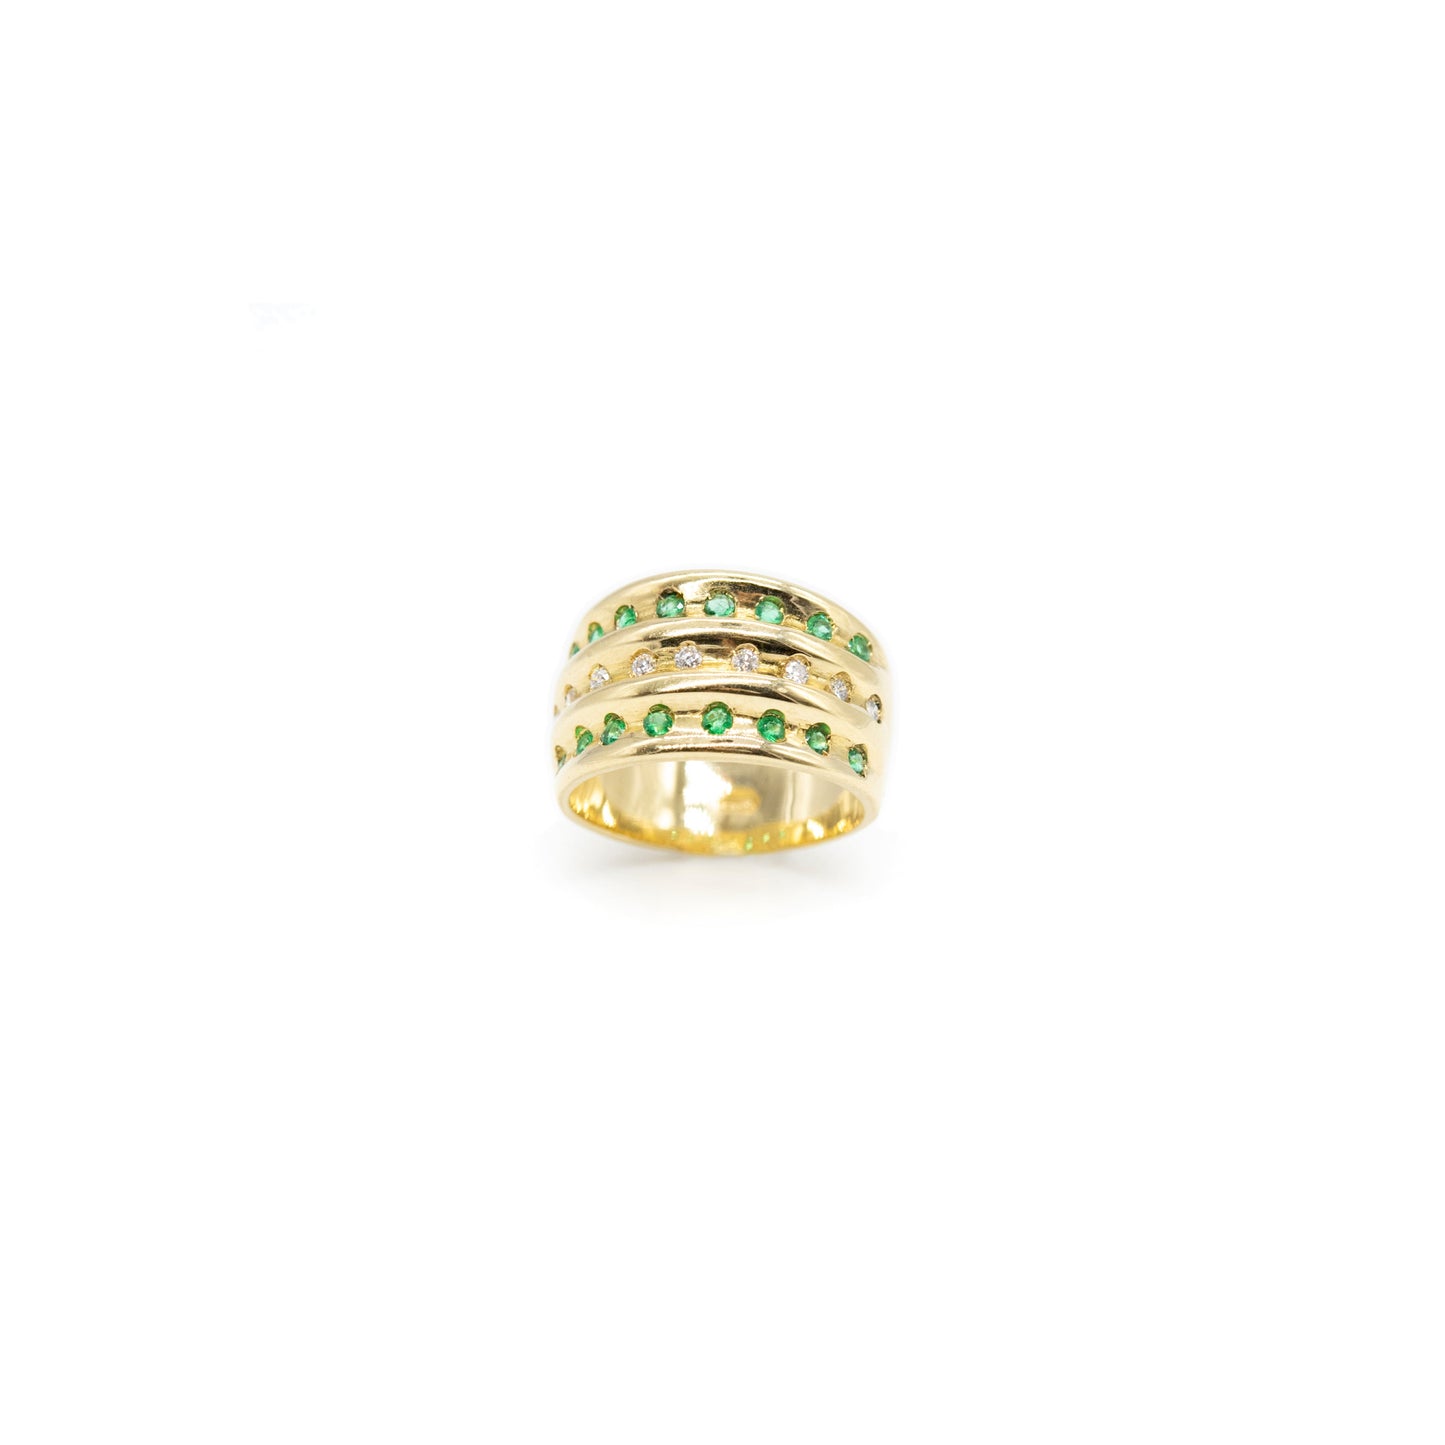 Vintage Emerald & Diamonds Ring For Women | India | Vintage jewelry | Pre-owned jewelry | Lil Milan